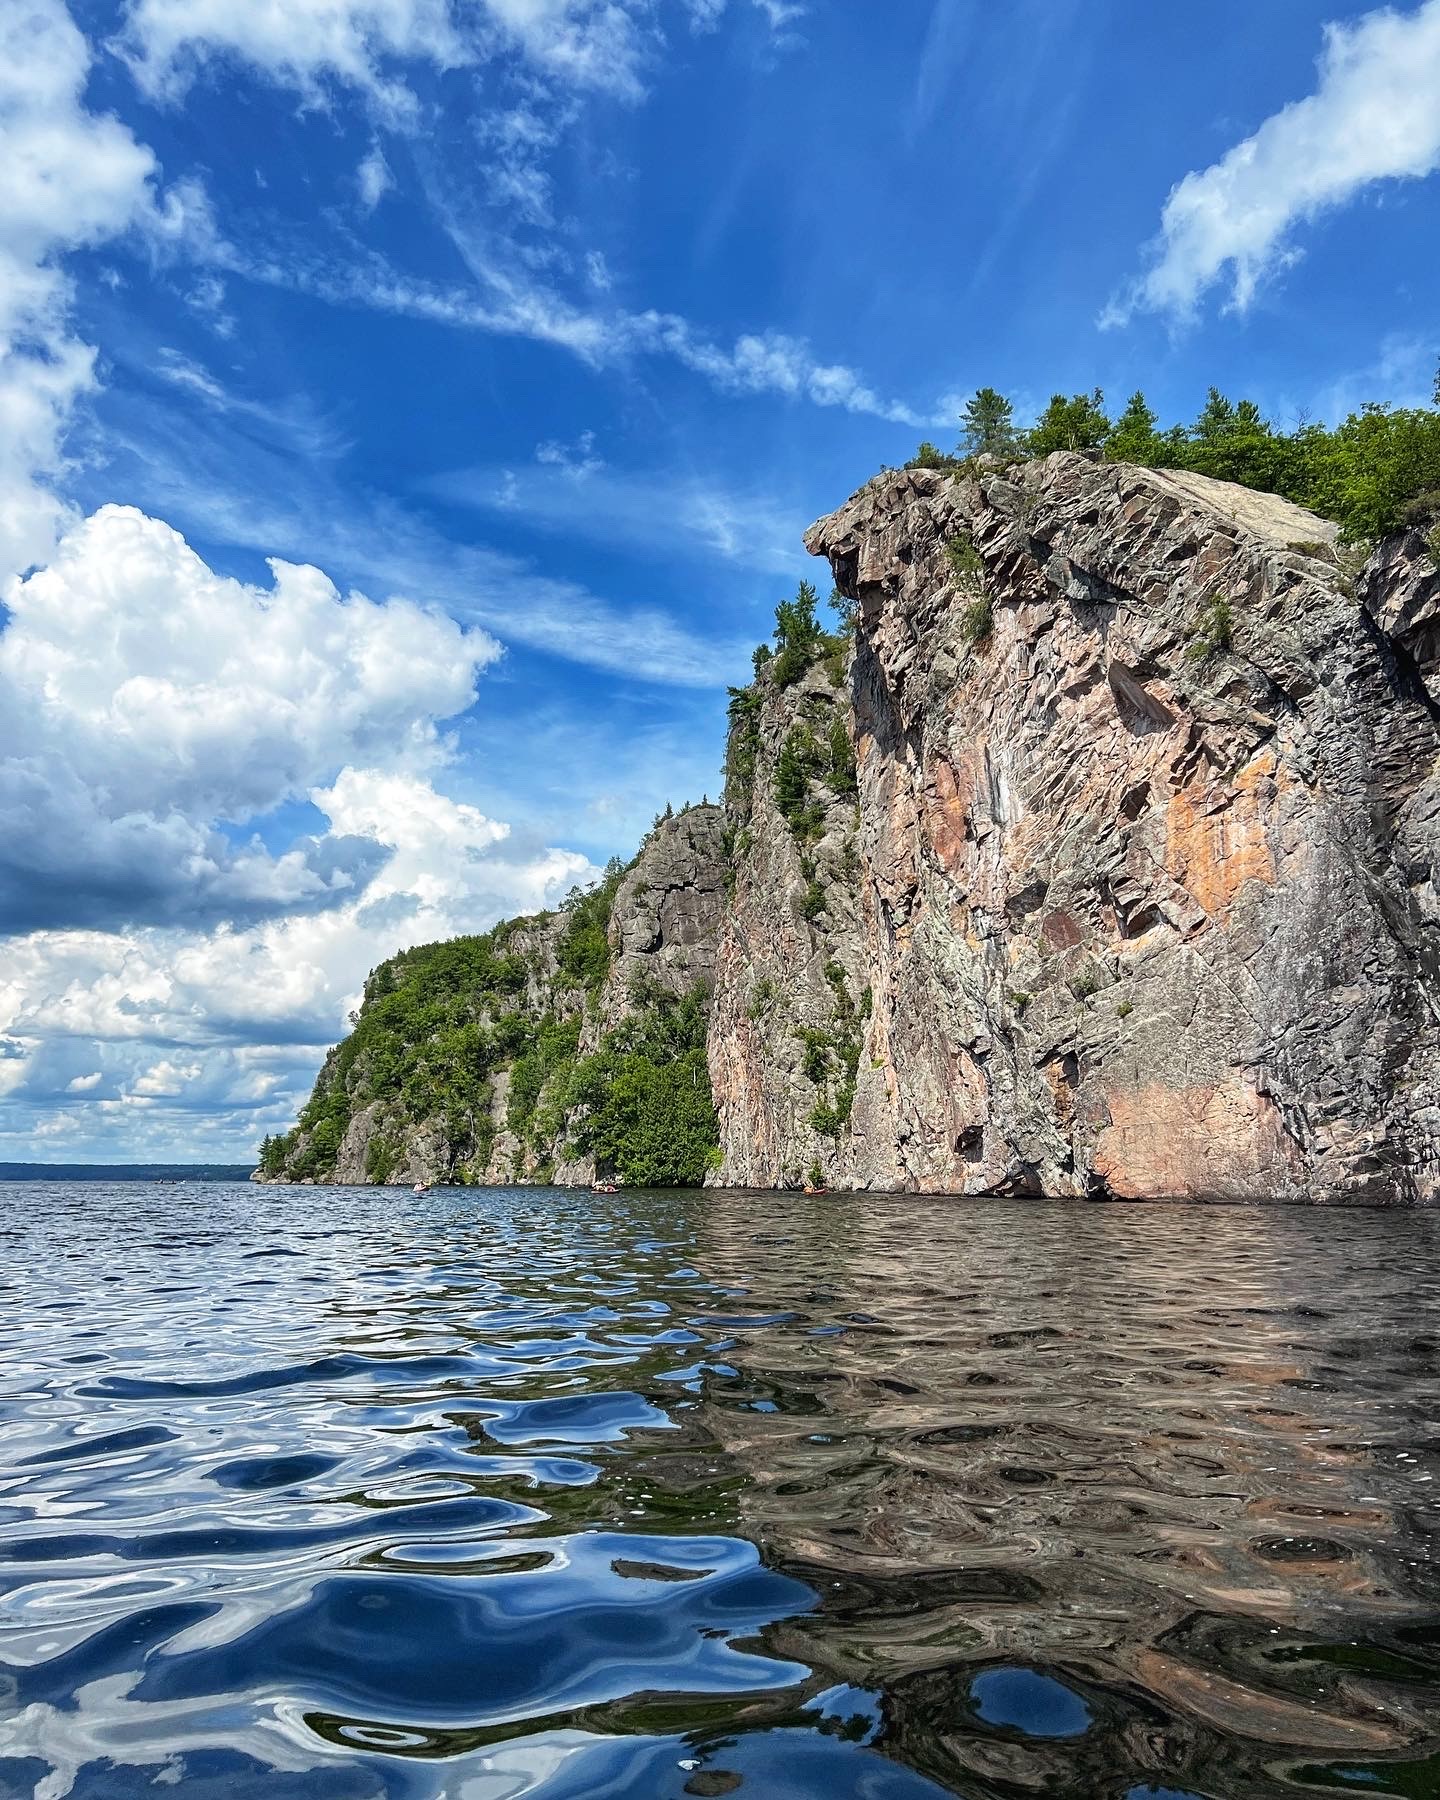 Mazinaw Rock on Mazinaw Lake adorned with over 260 Indigenous pictographs, a place of self reflection. - Jenny Tolevski